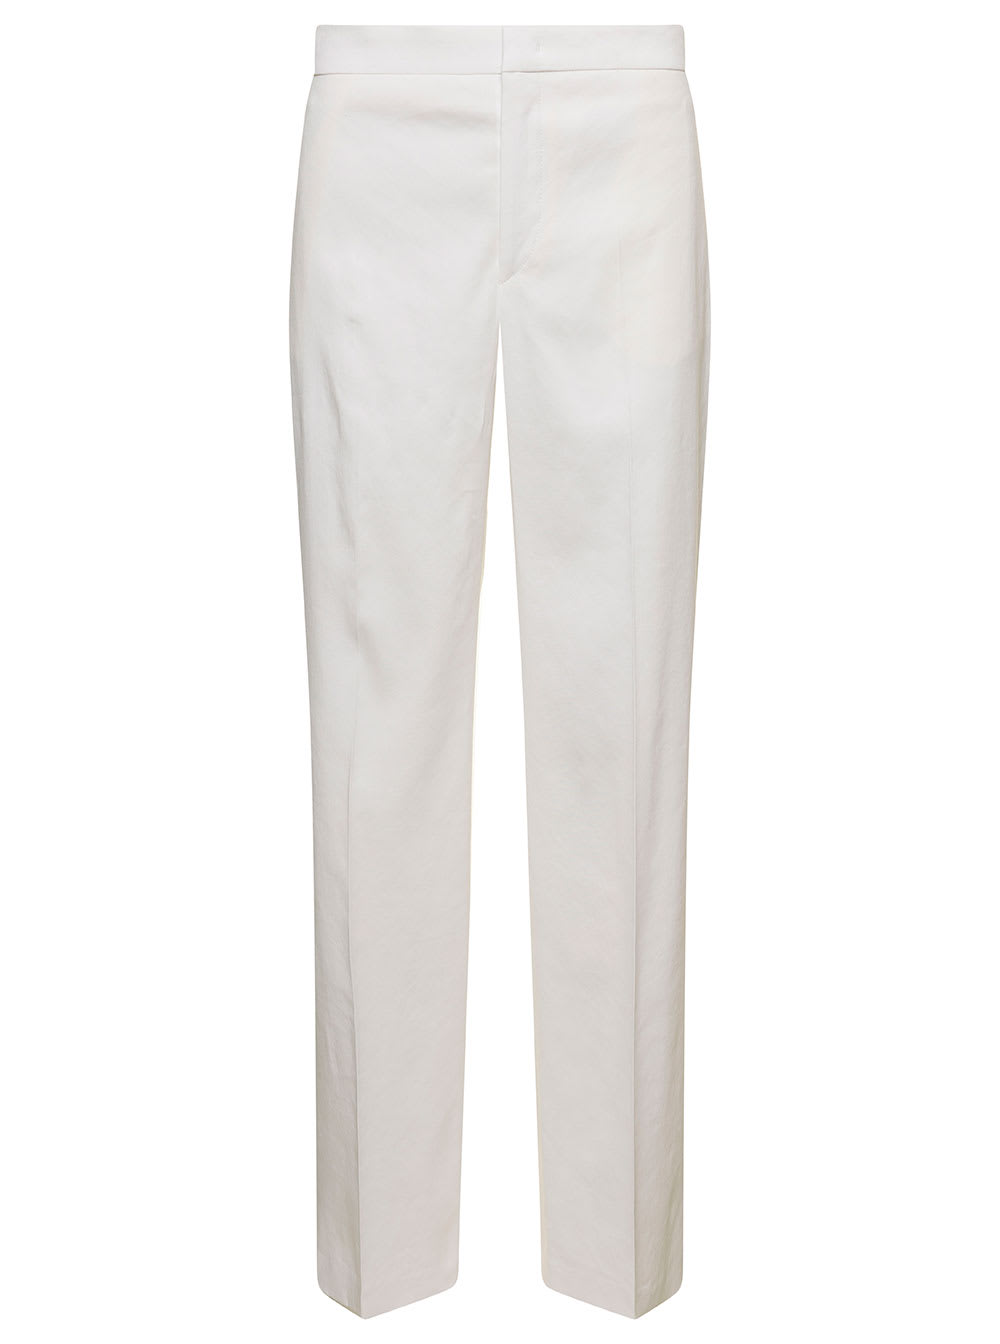 ISABEL MARANT WHITE HIGH-WAISTED TAILORED TROUSERS IN HEMP BLEND WOMAN